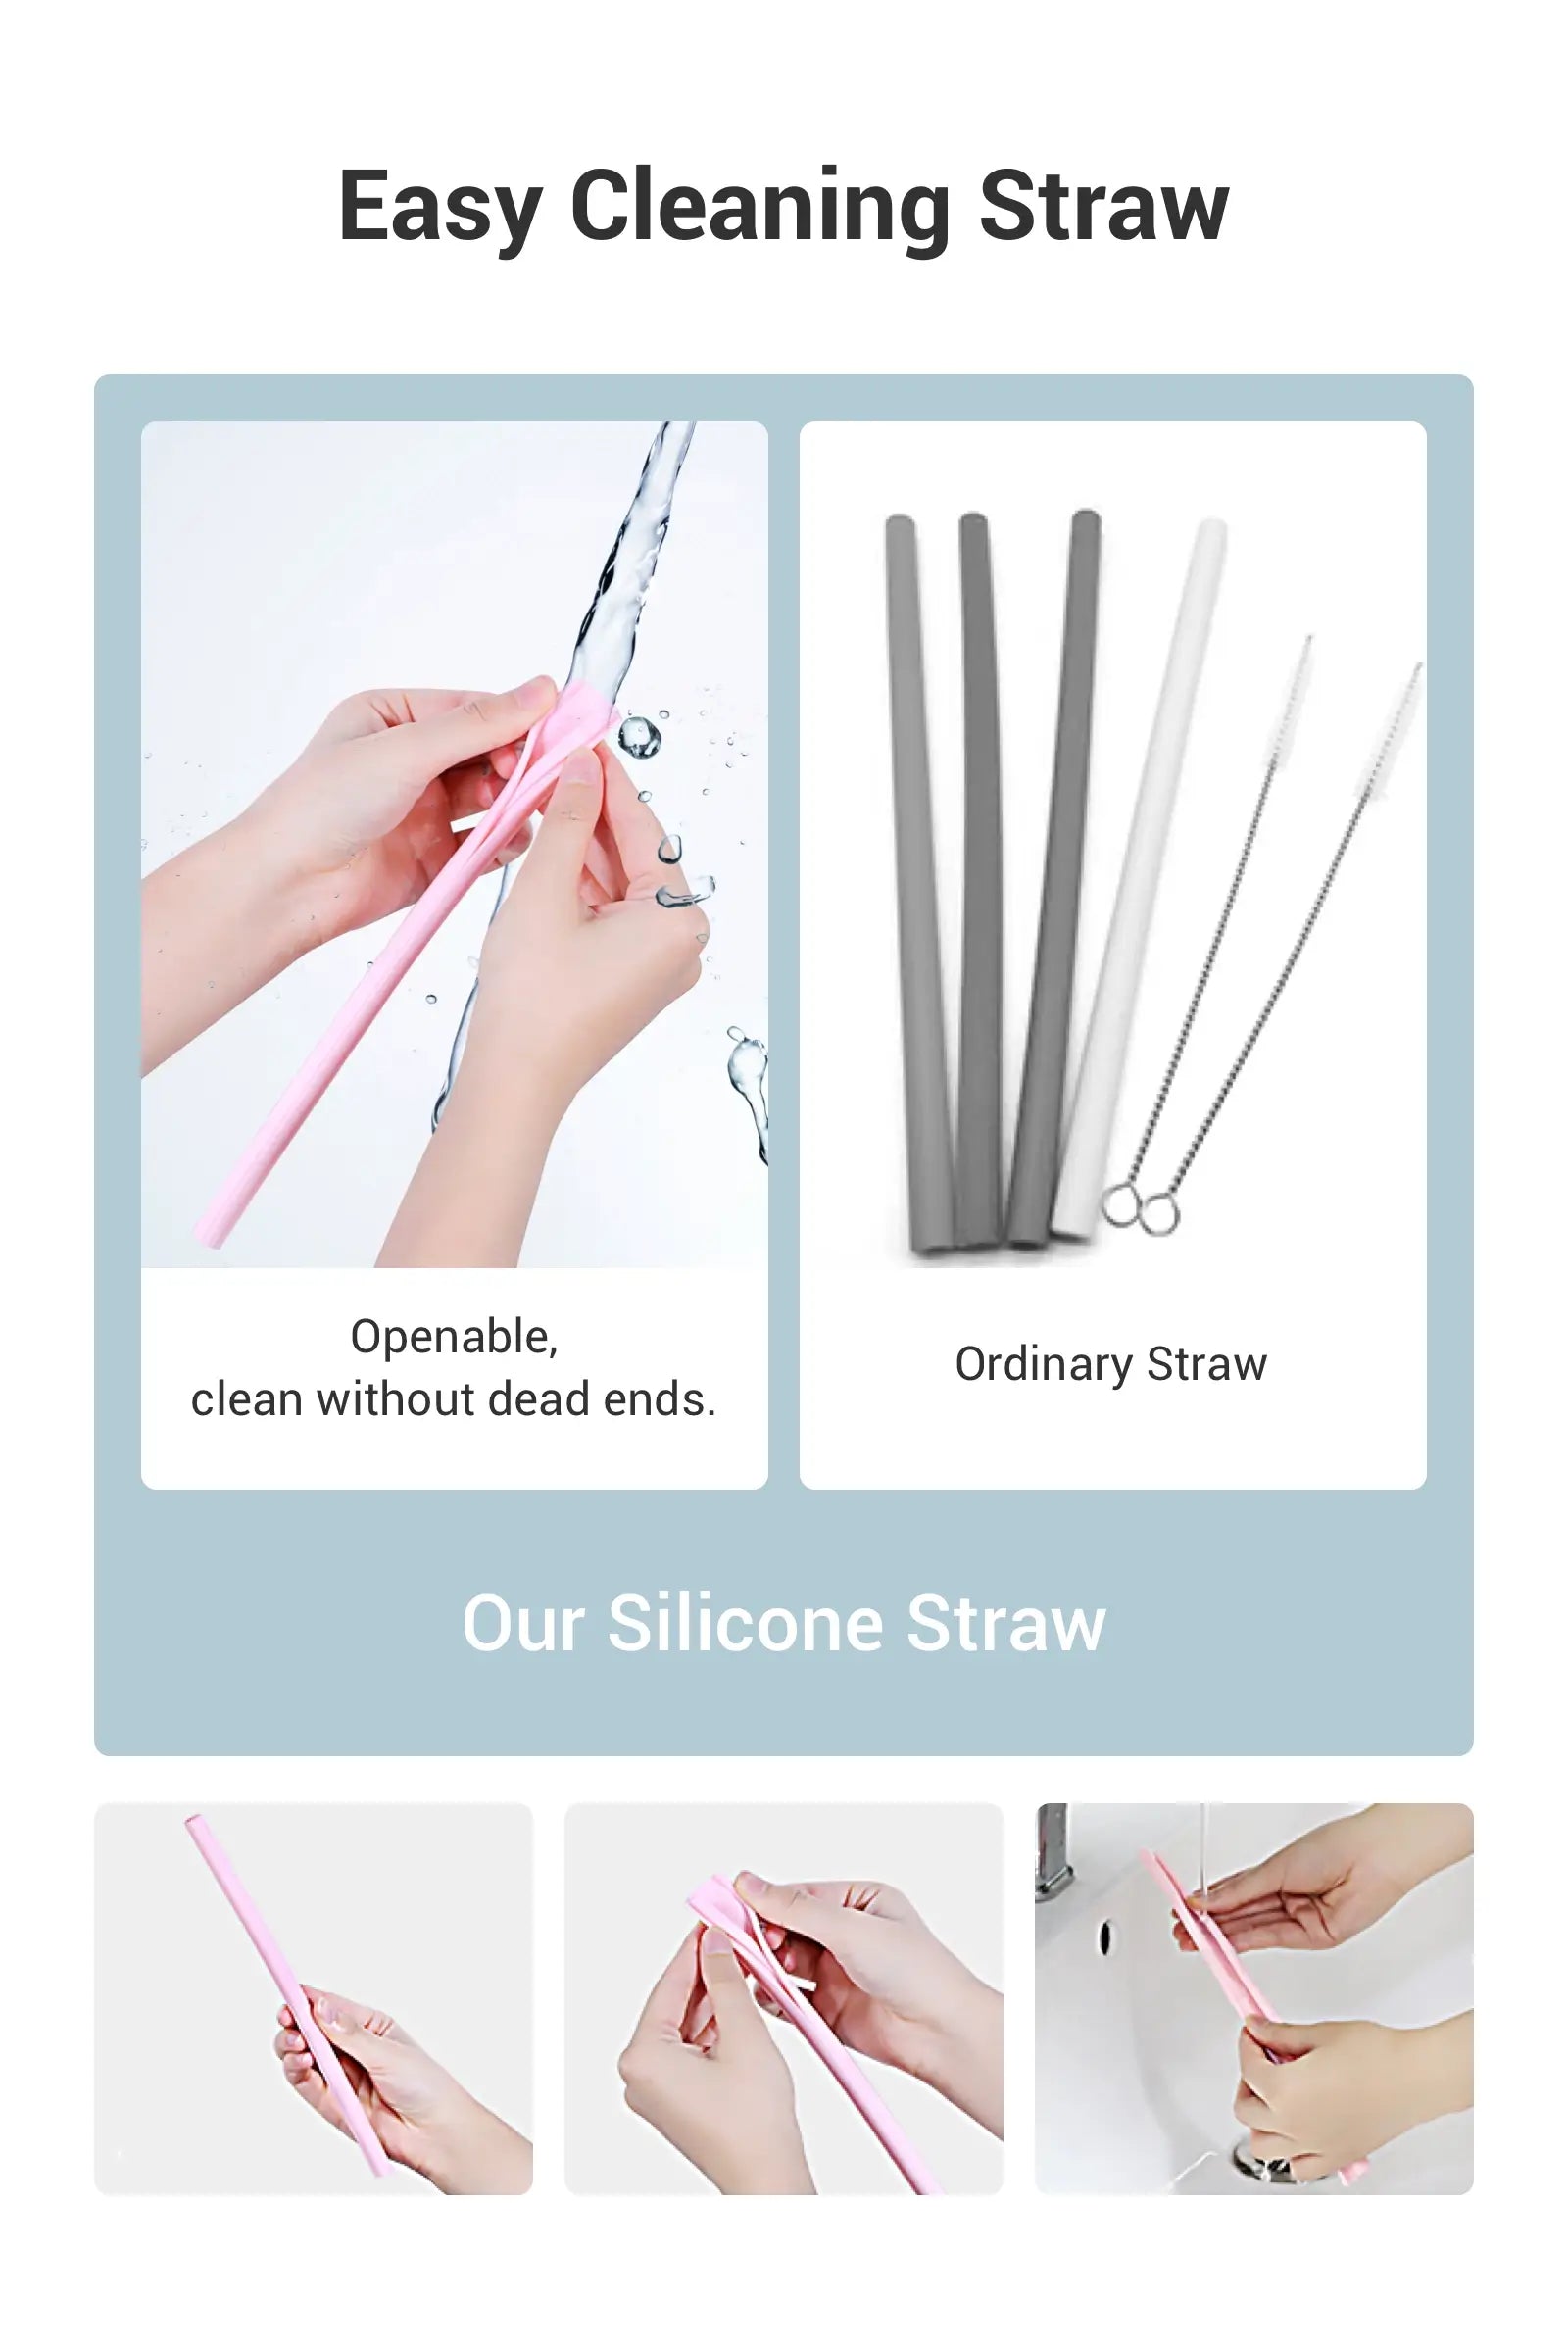 Easy Cleaning Straw